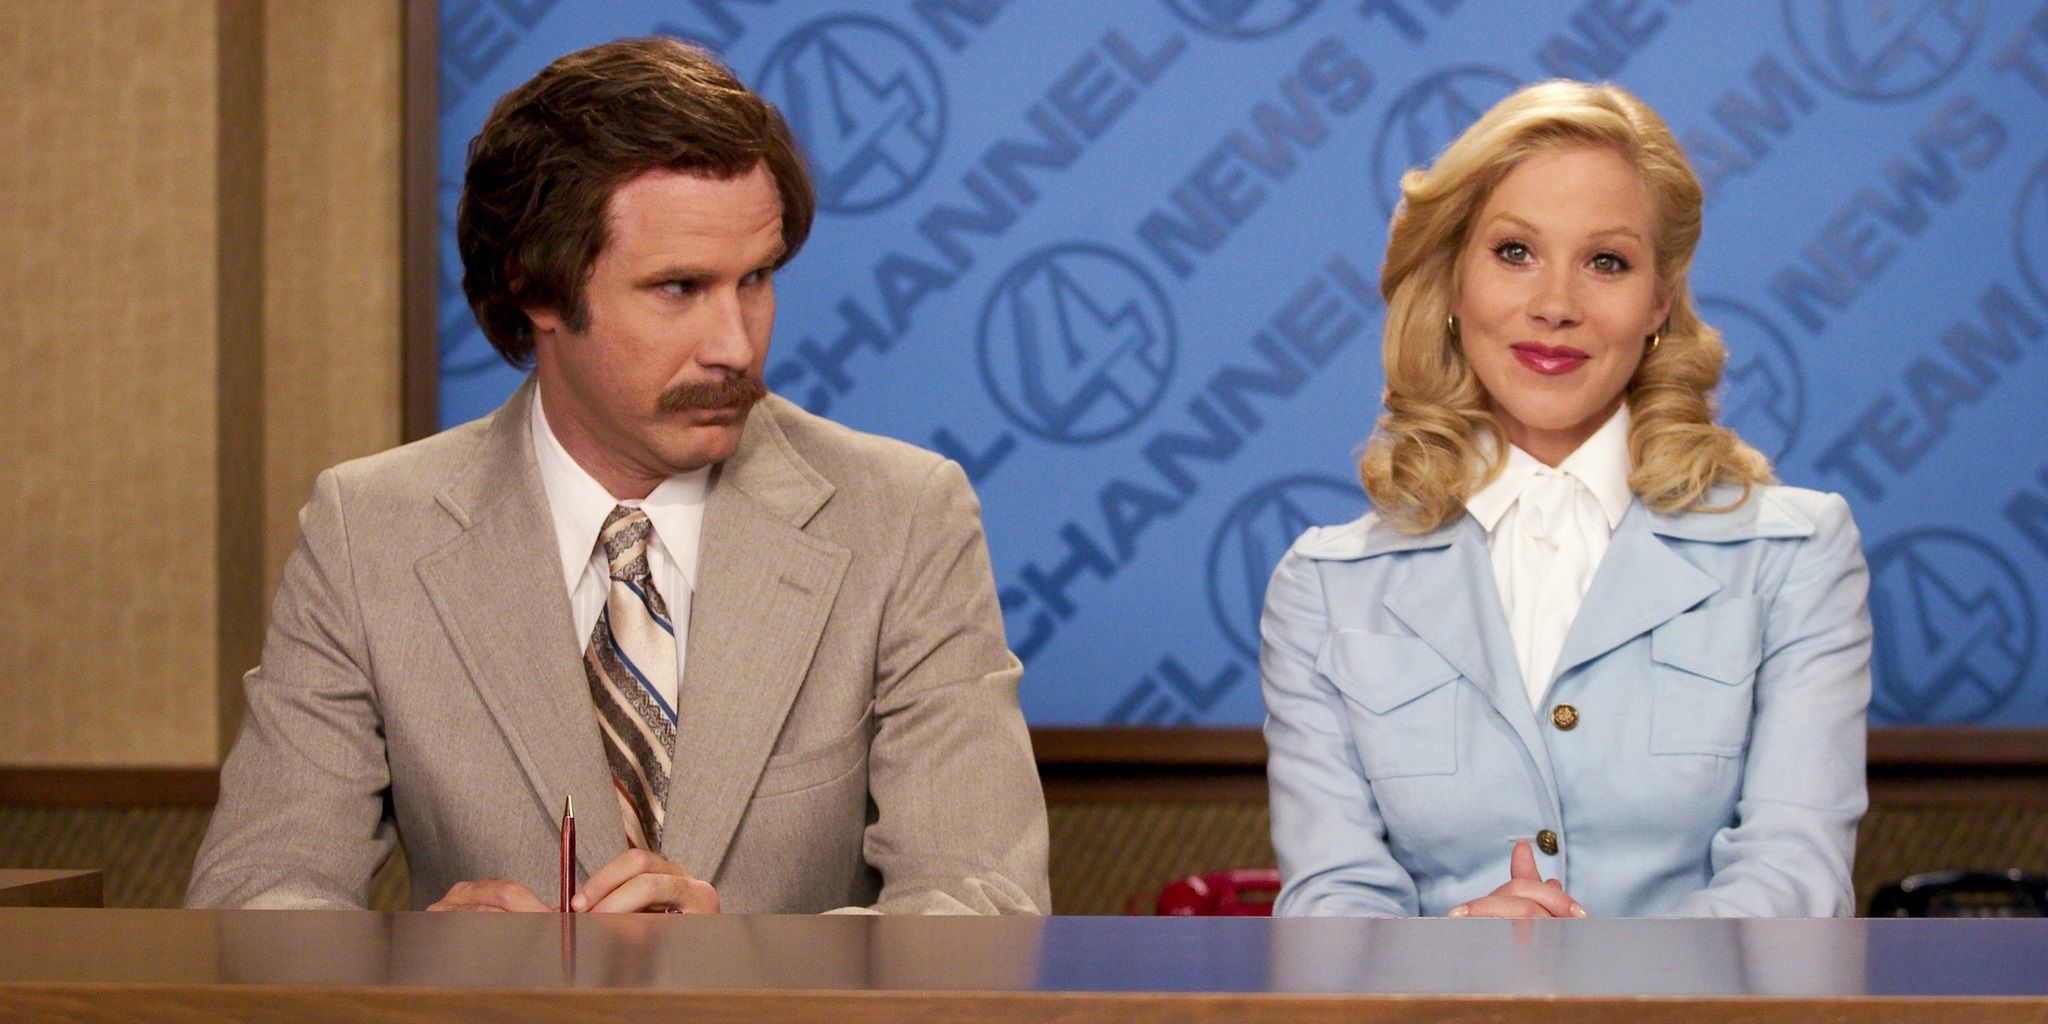 Ron and Veronica in Anchorman